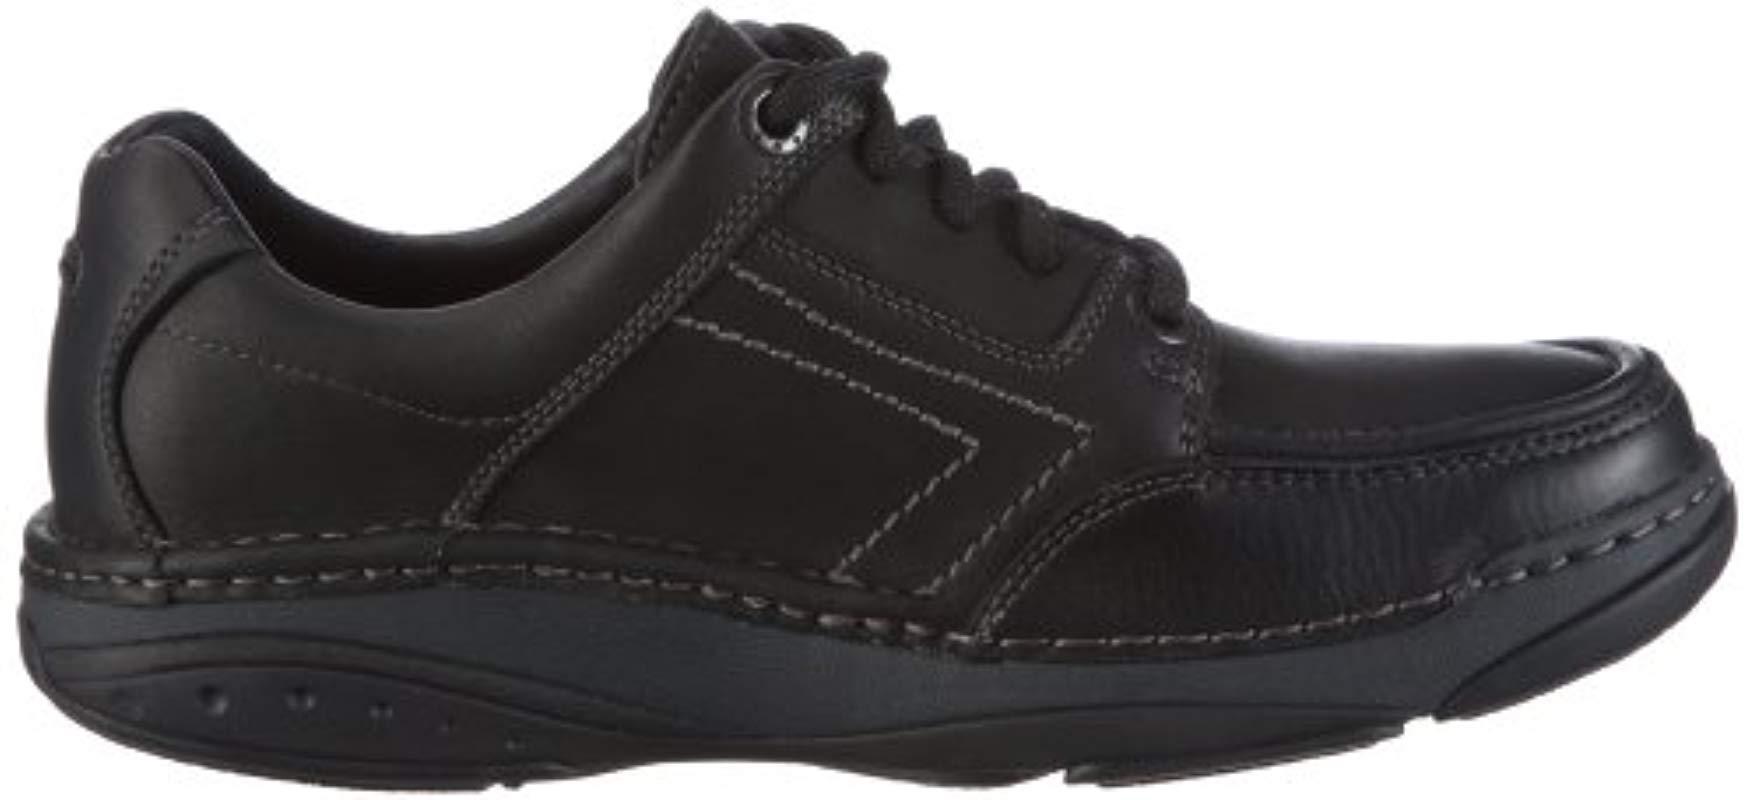 Clarks Movers Lo Gtx Lace-ups Black 